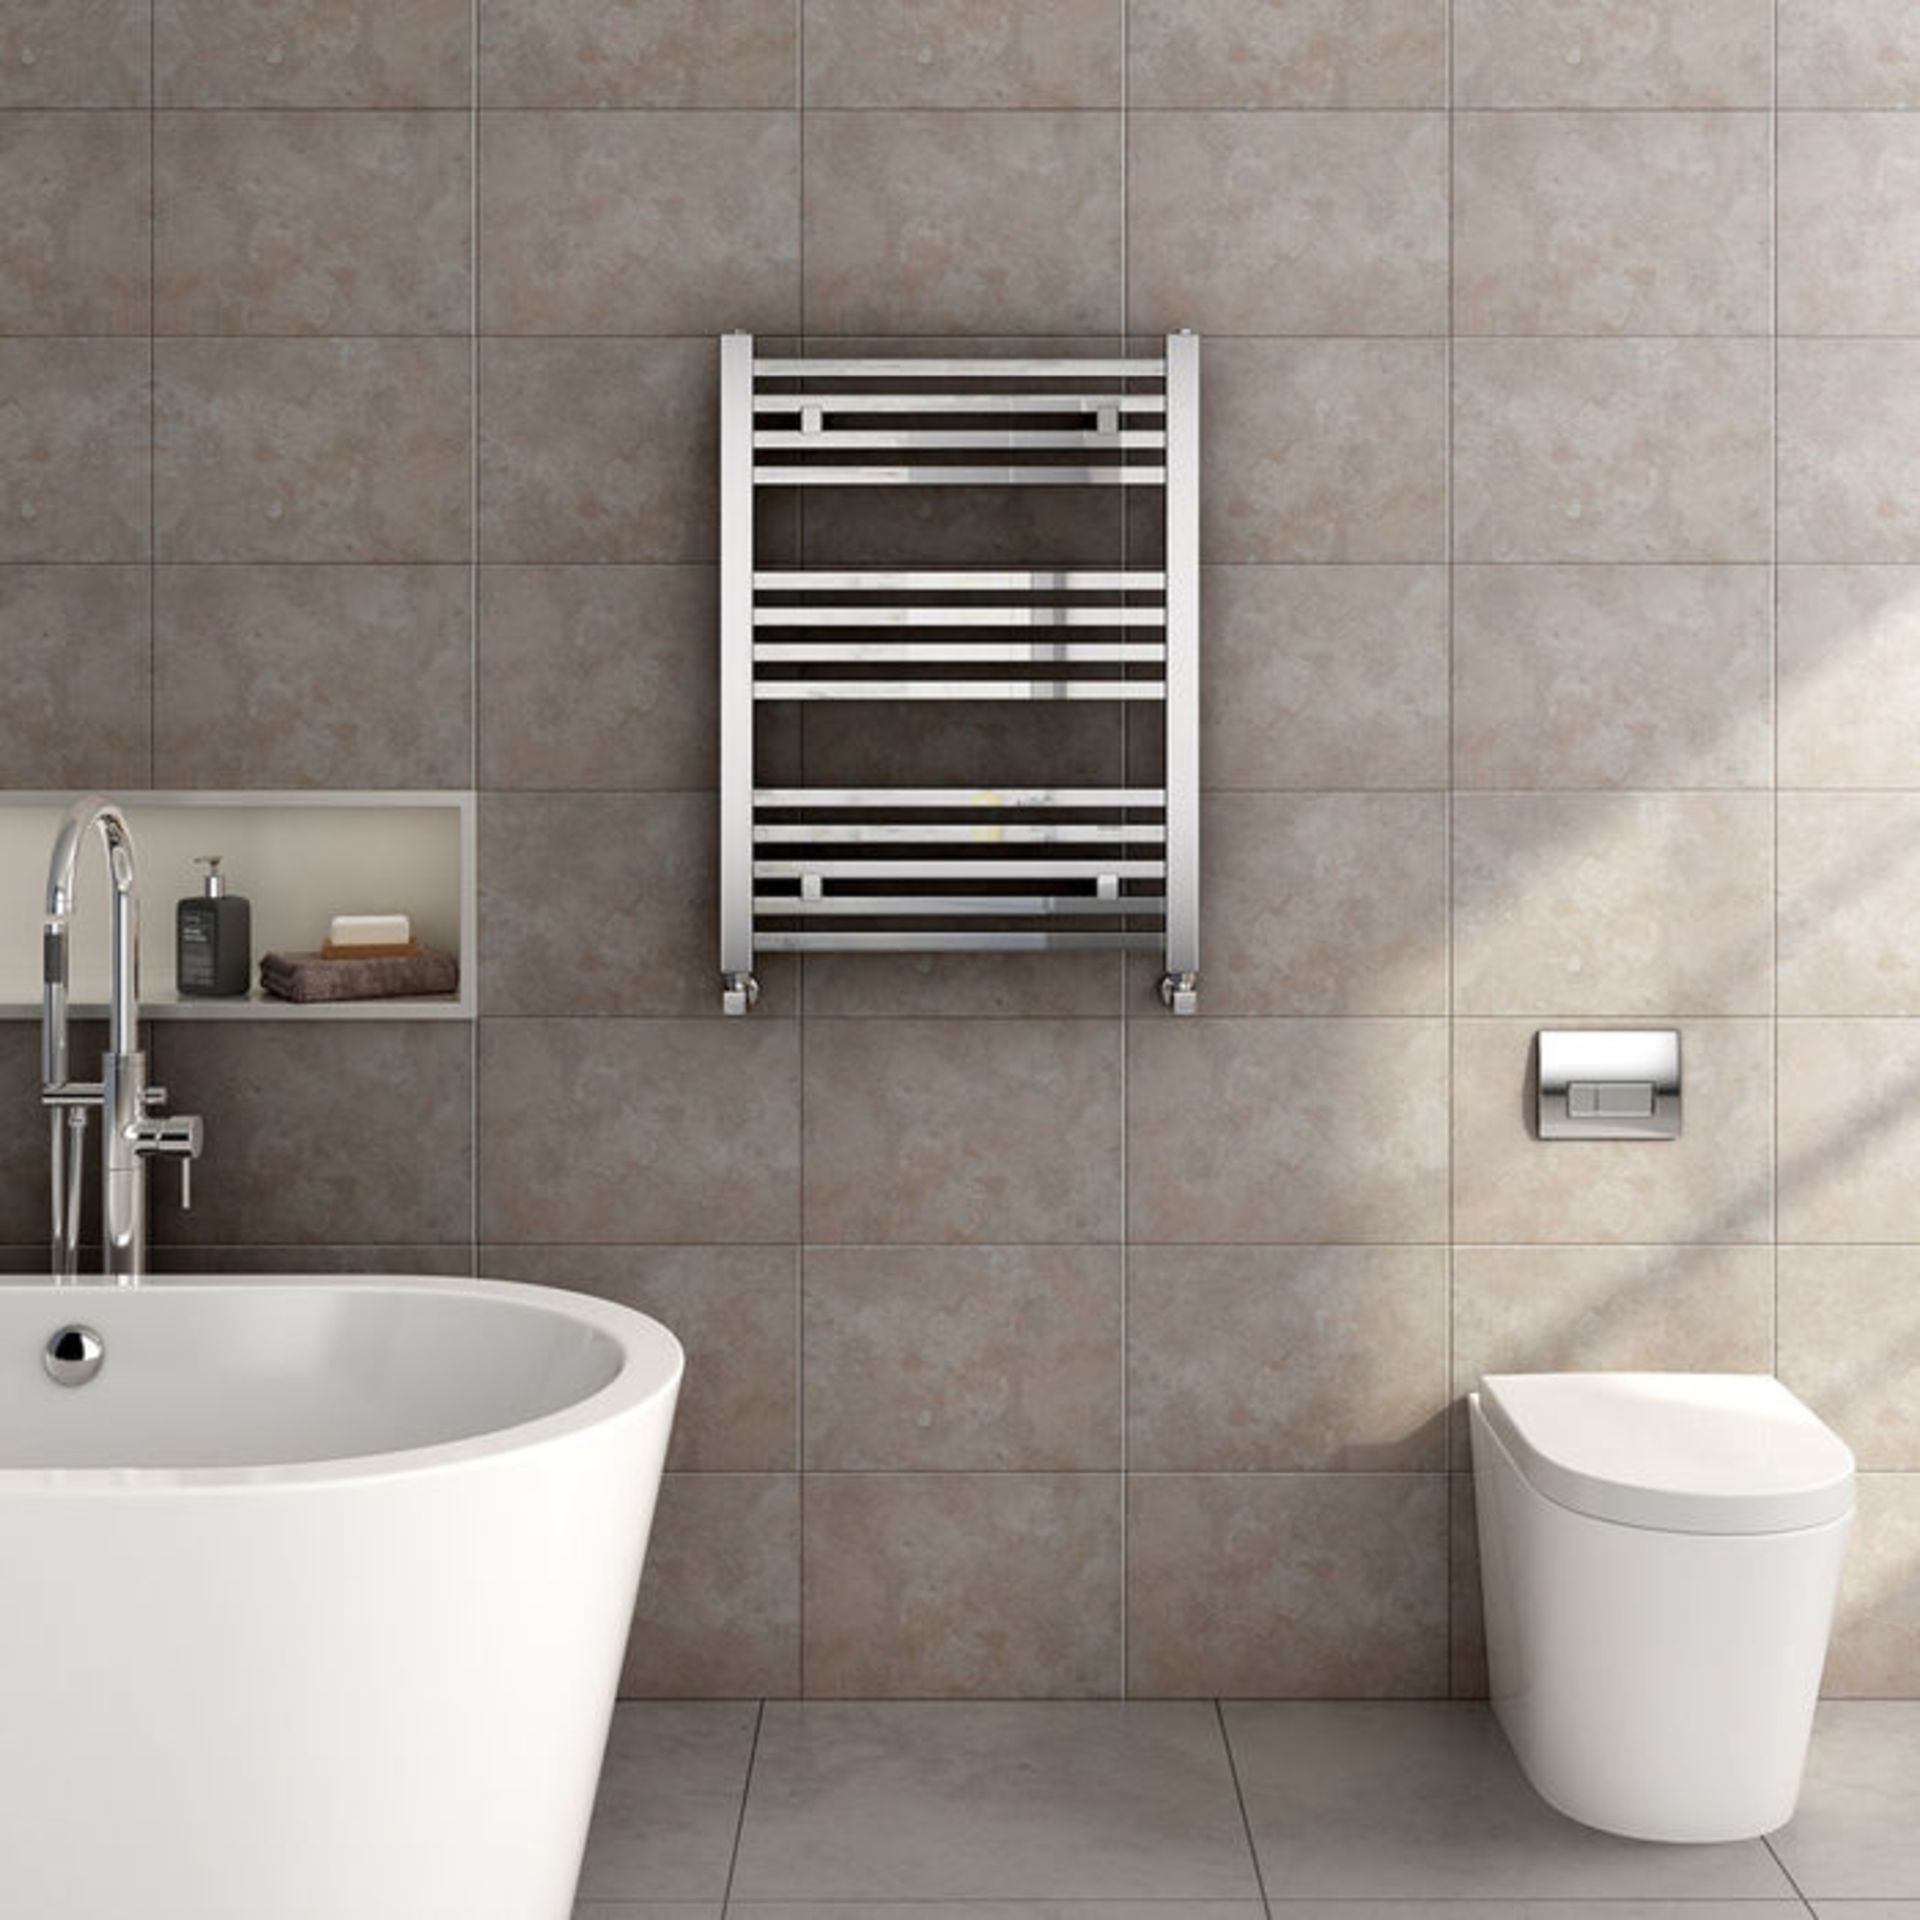 (MW108) 800x600mm Chrome Square Rail Ladder Towel Radiator. Made from low carbon steel with a high - Bild 2 aus 3